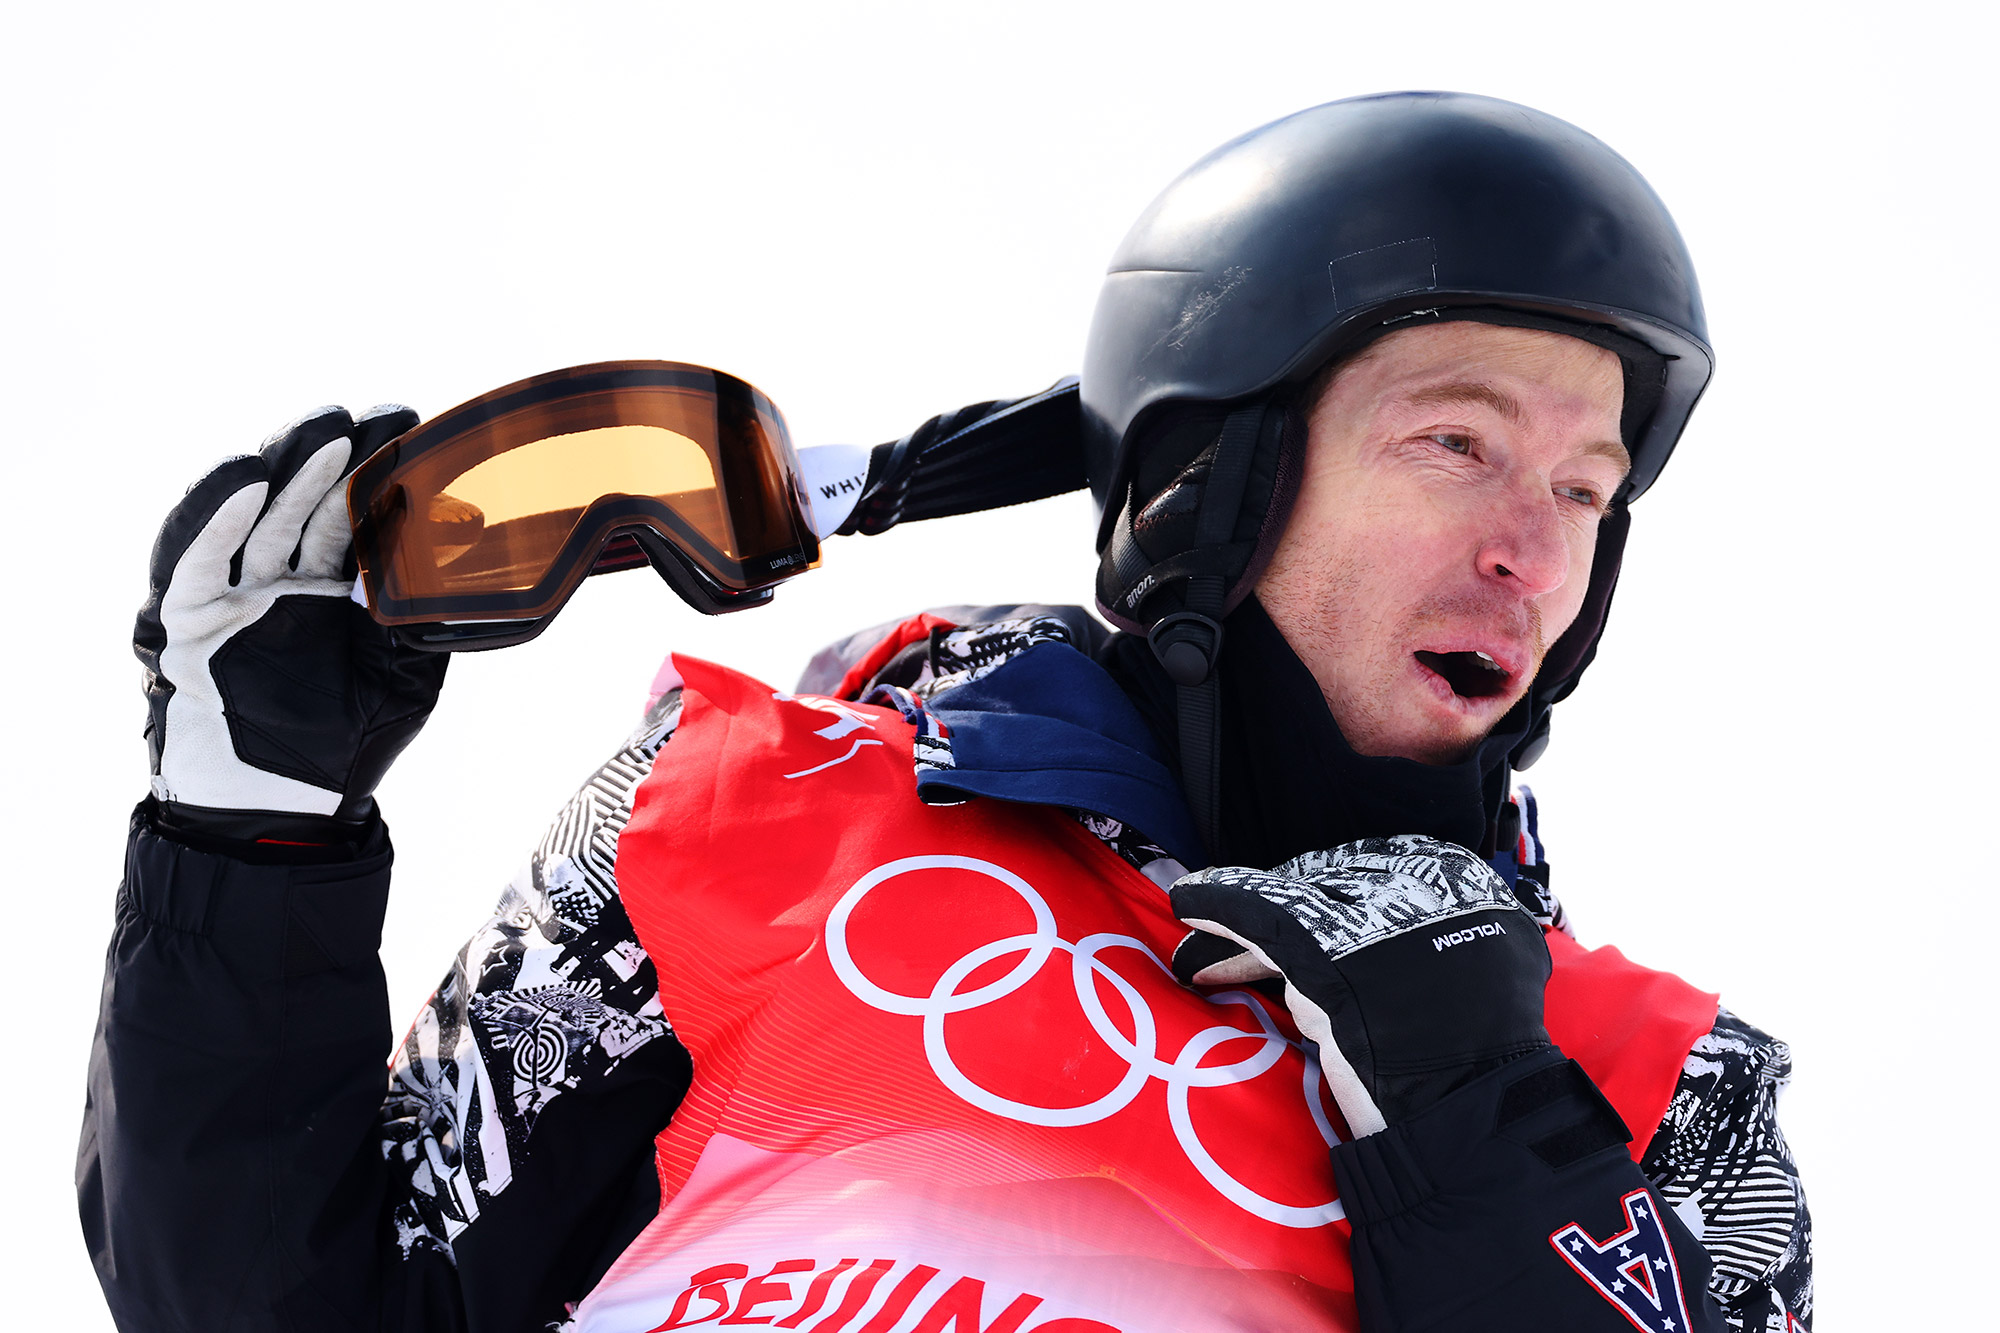 Team USA's Shaun White was visibly relieved after nailing his second run in the halfpipe qualification on Wednesday.